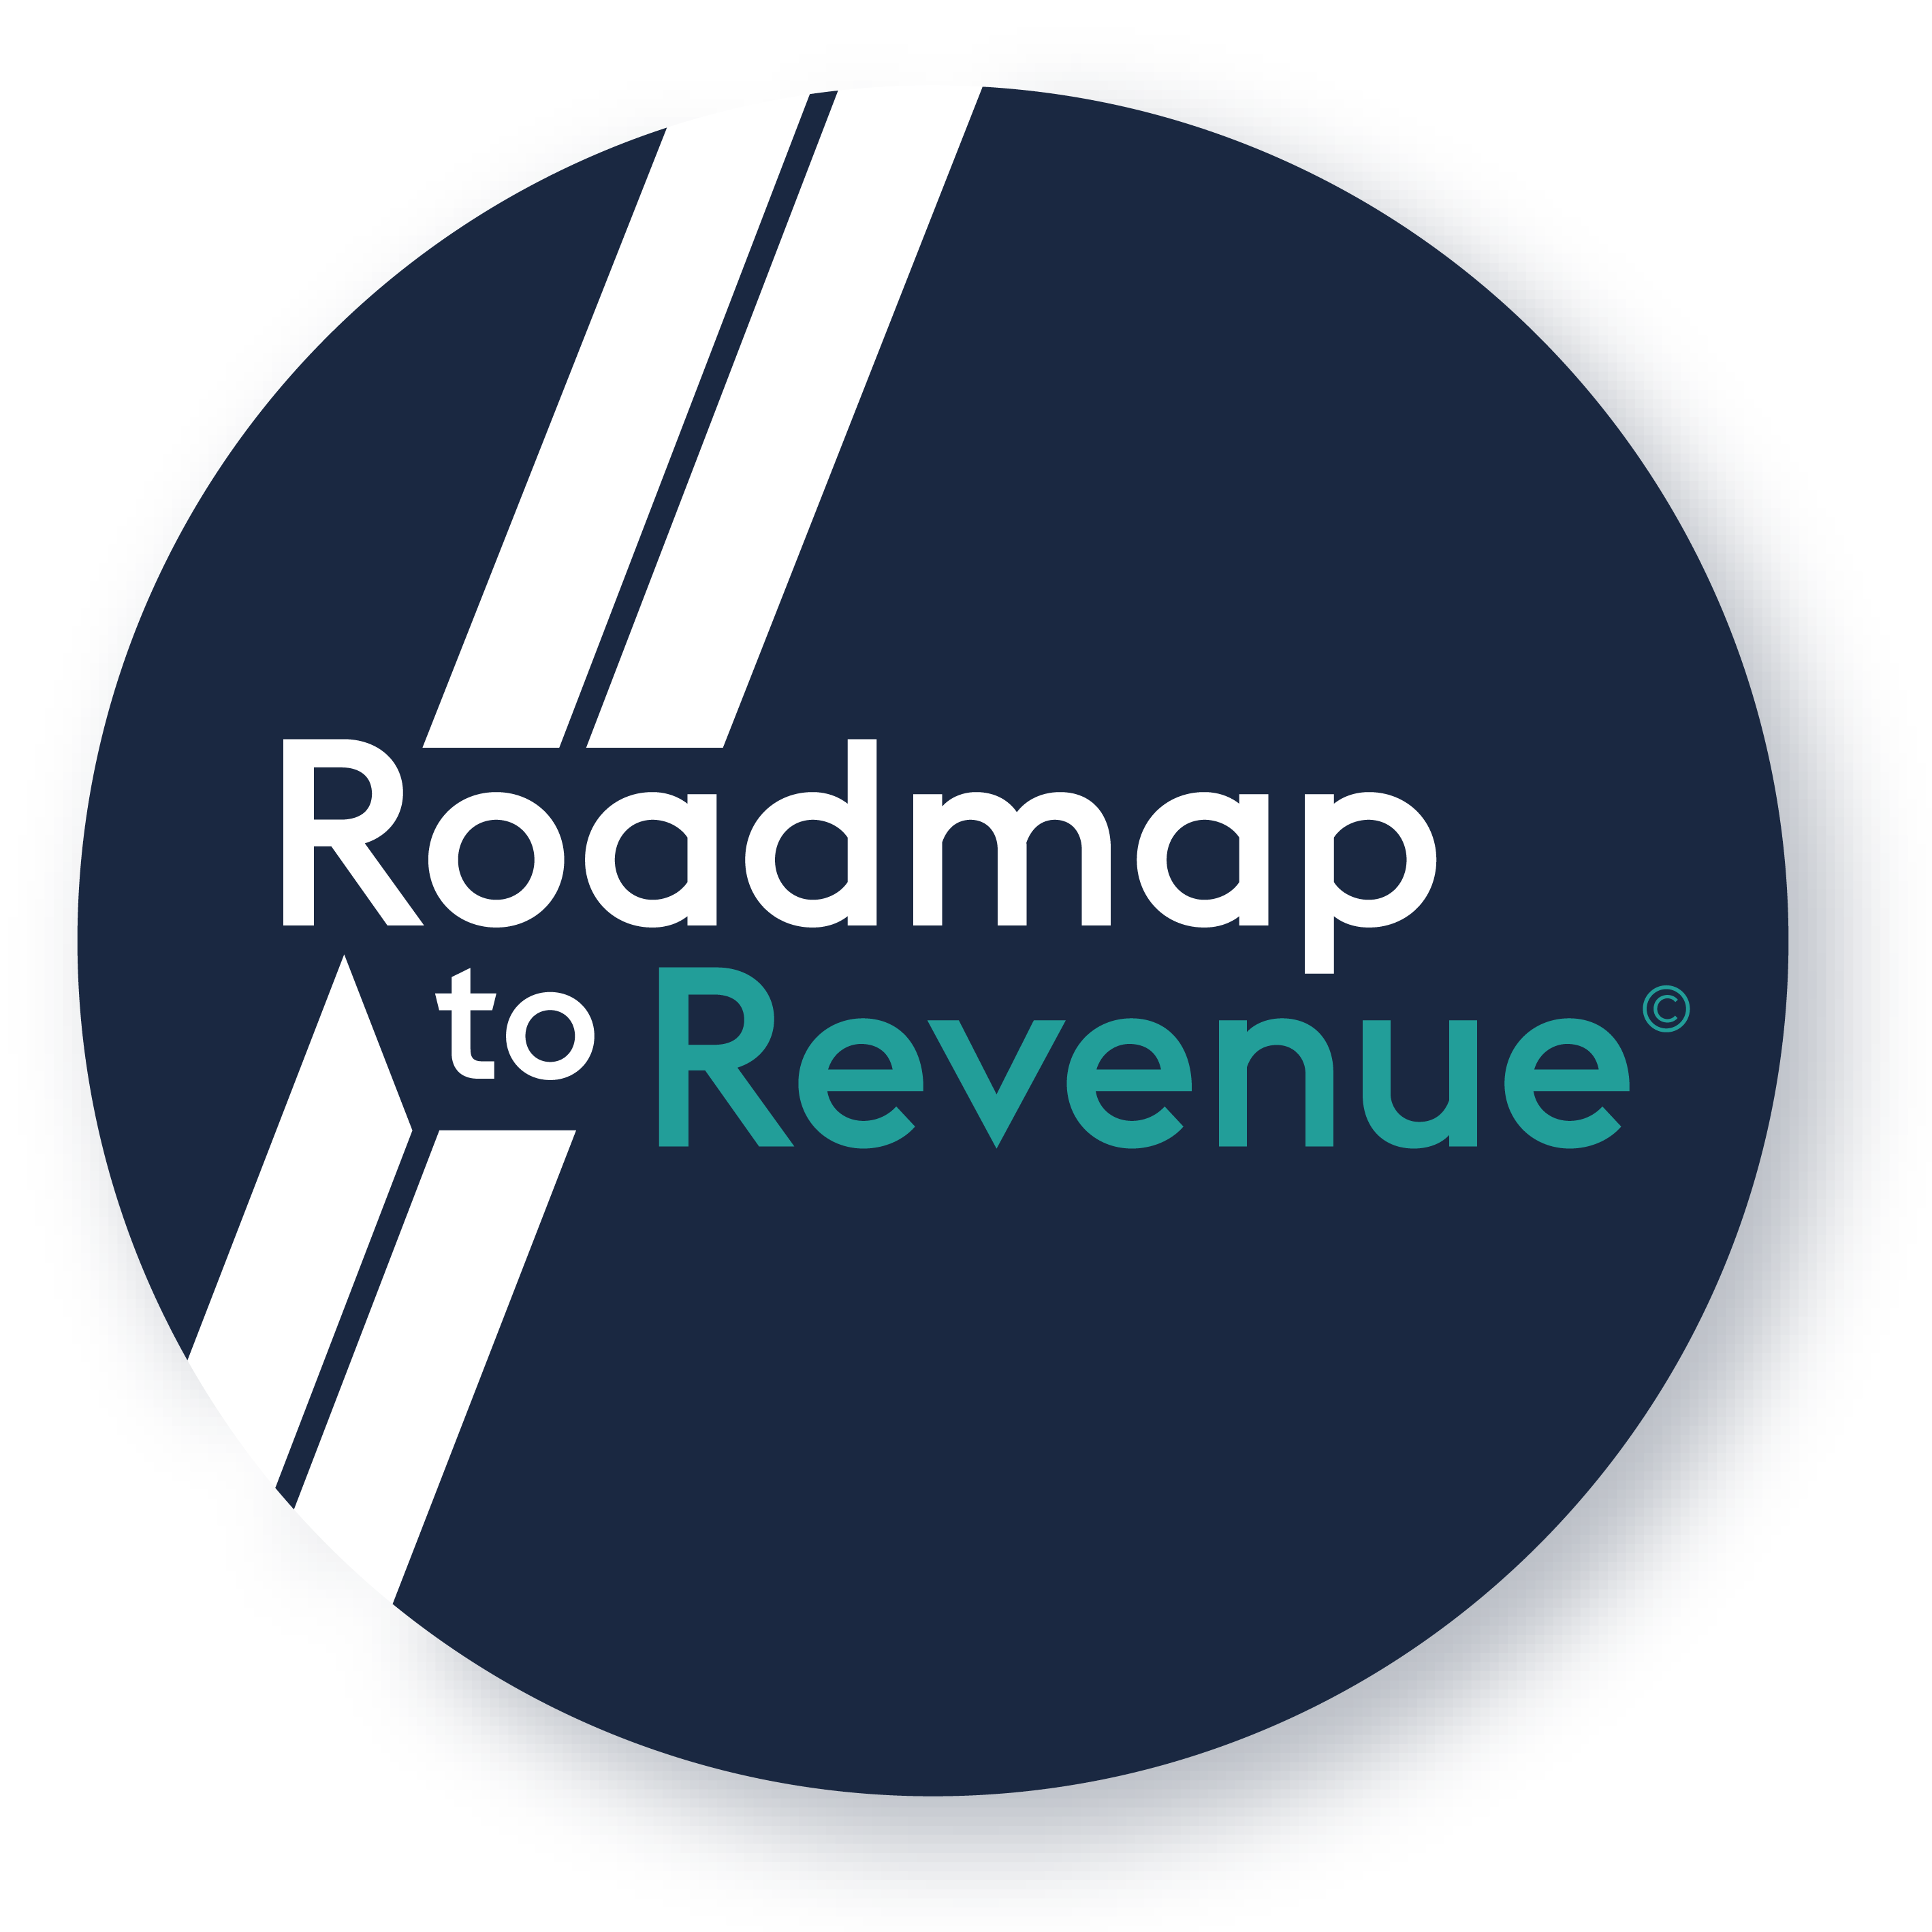 Roadmap to Revenue logo in white and green on a navy circle